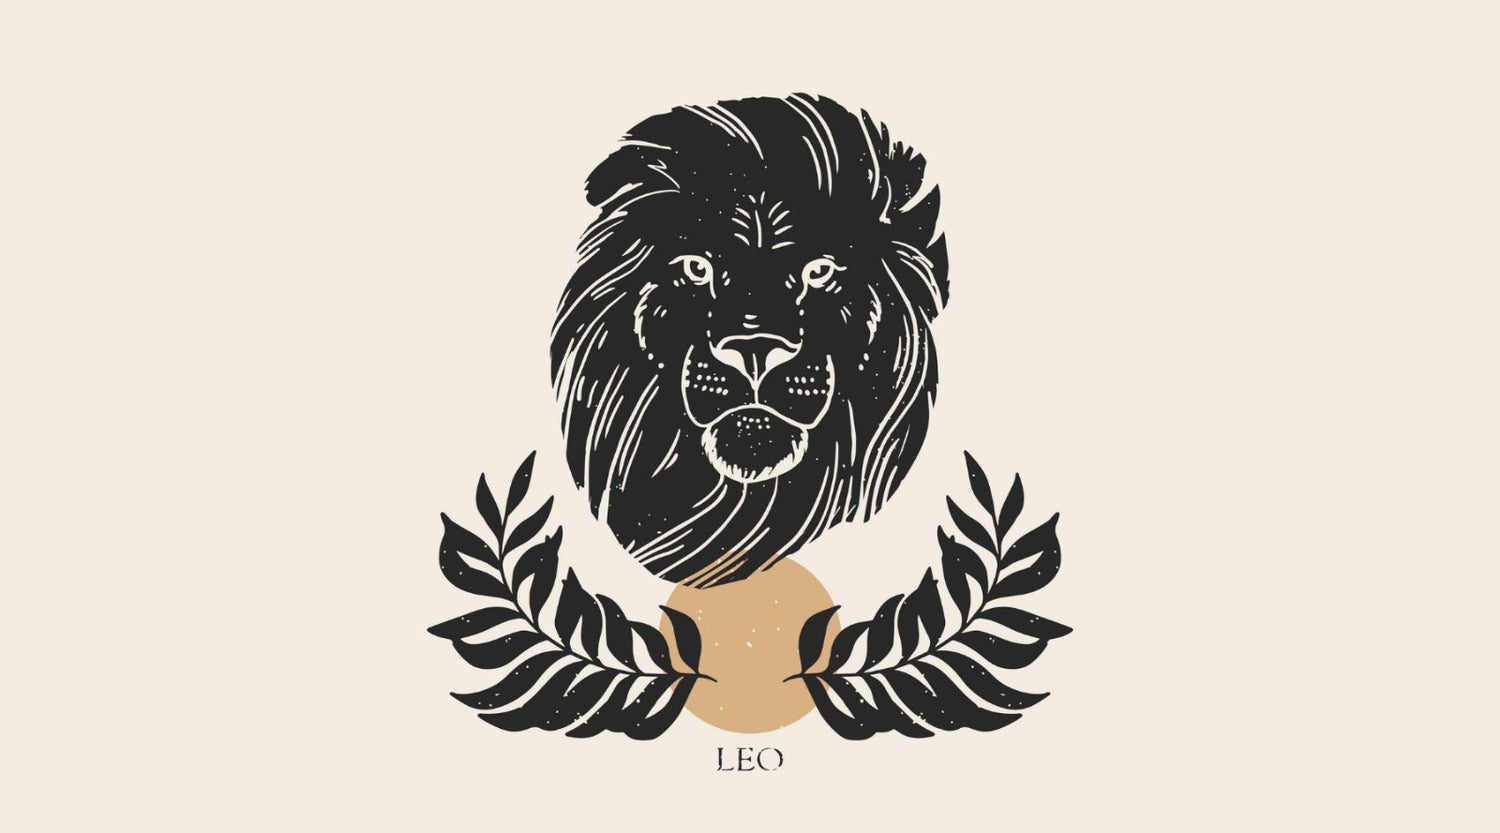 Leo Crystals: The 10 Best Crystals For Leo And How To Use Them